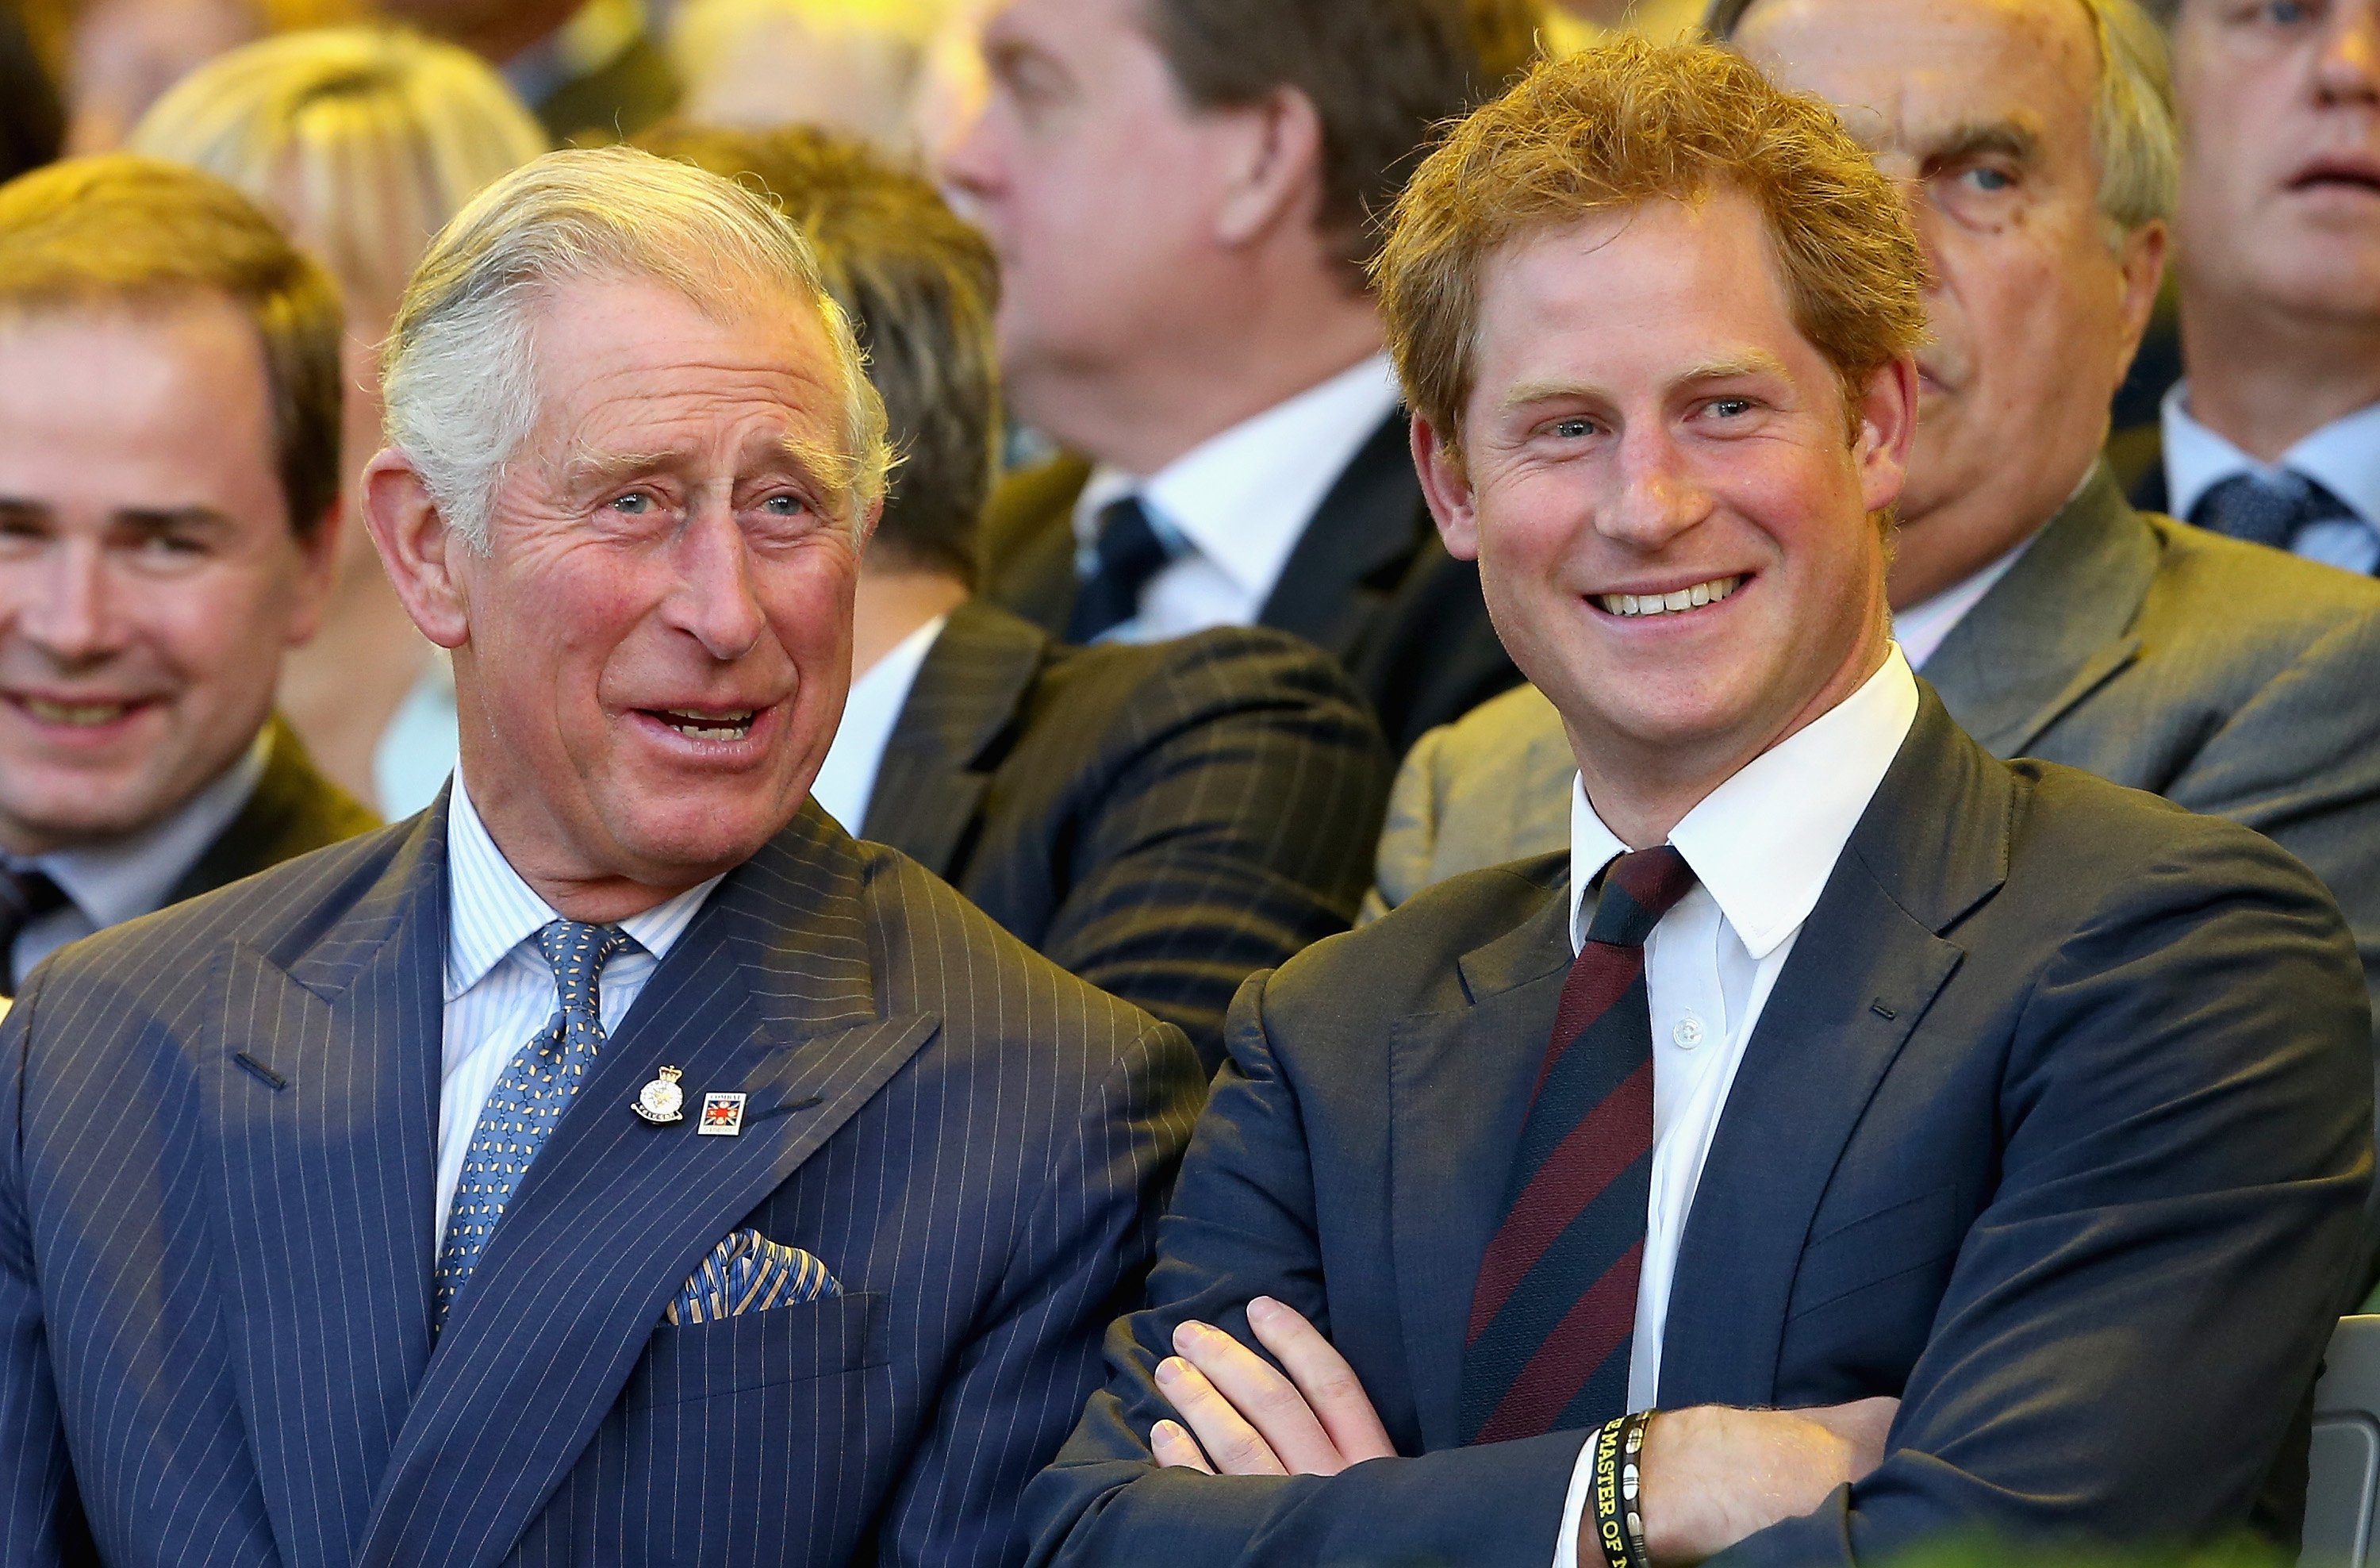 King Charles III and Prince Harry laugh during the Invictus Games Opening Ceremony on September 10, 2014, in London, England. | Source: Getty Images